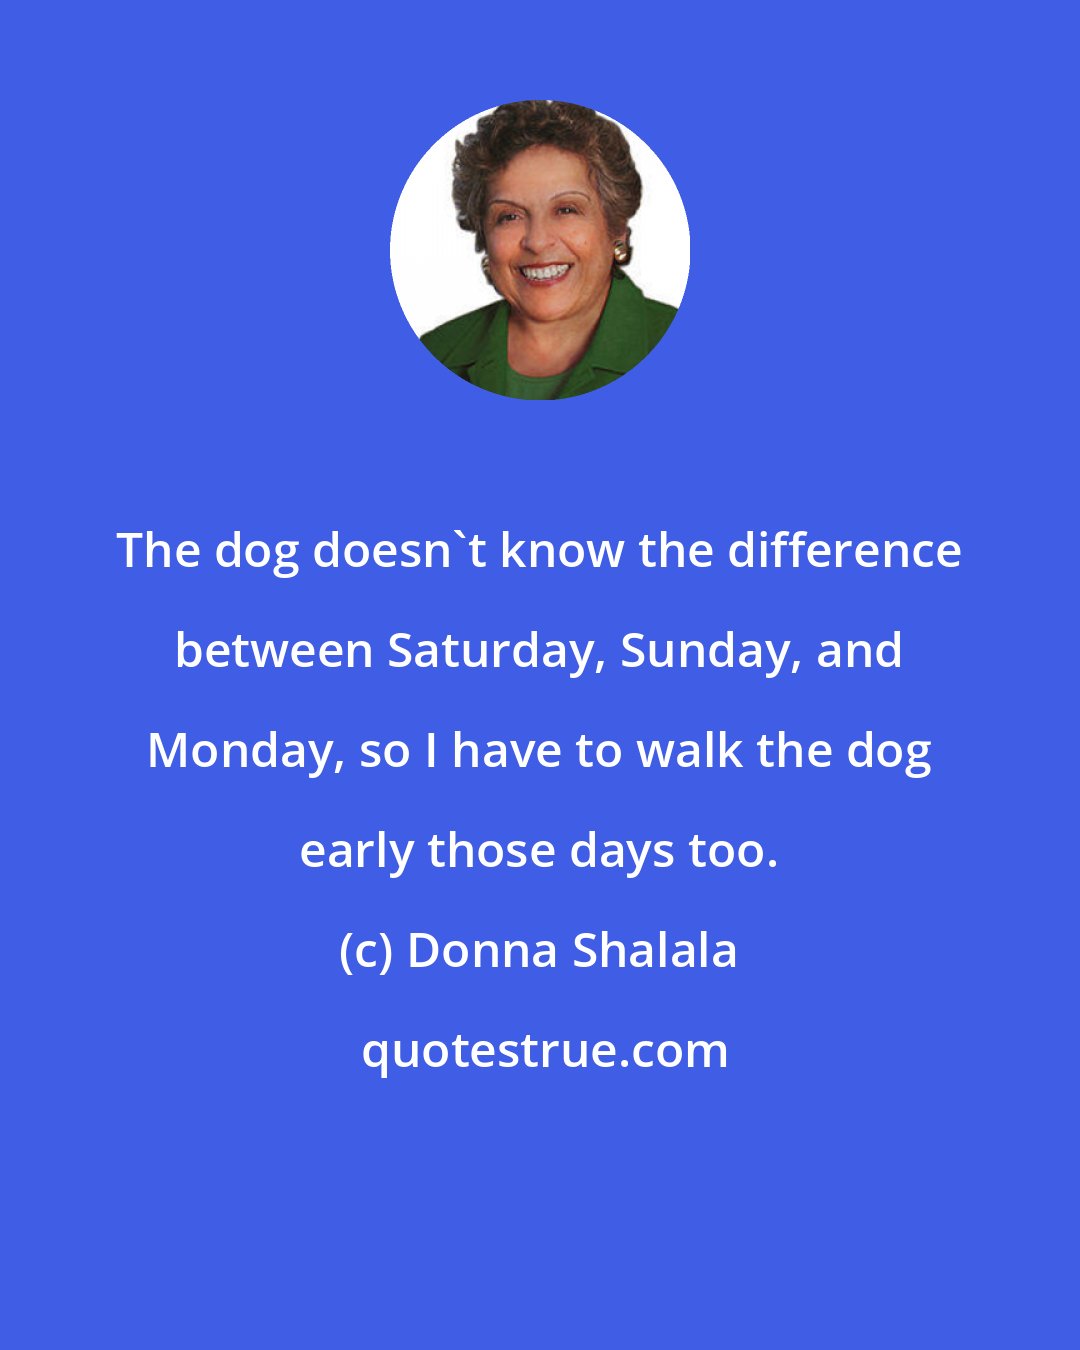 Donna Shalala: The dog doesn't know the difference between Saturday, Sunday, and Monday, so I have to walk the dog early those days too.